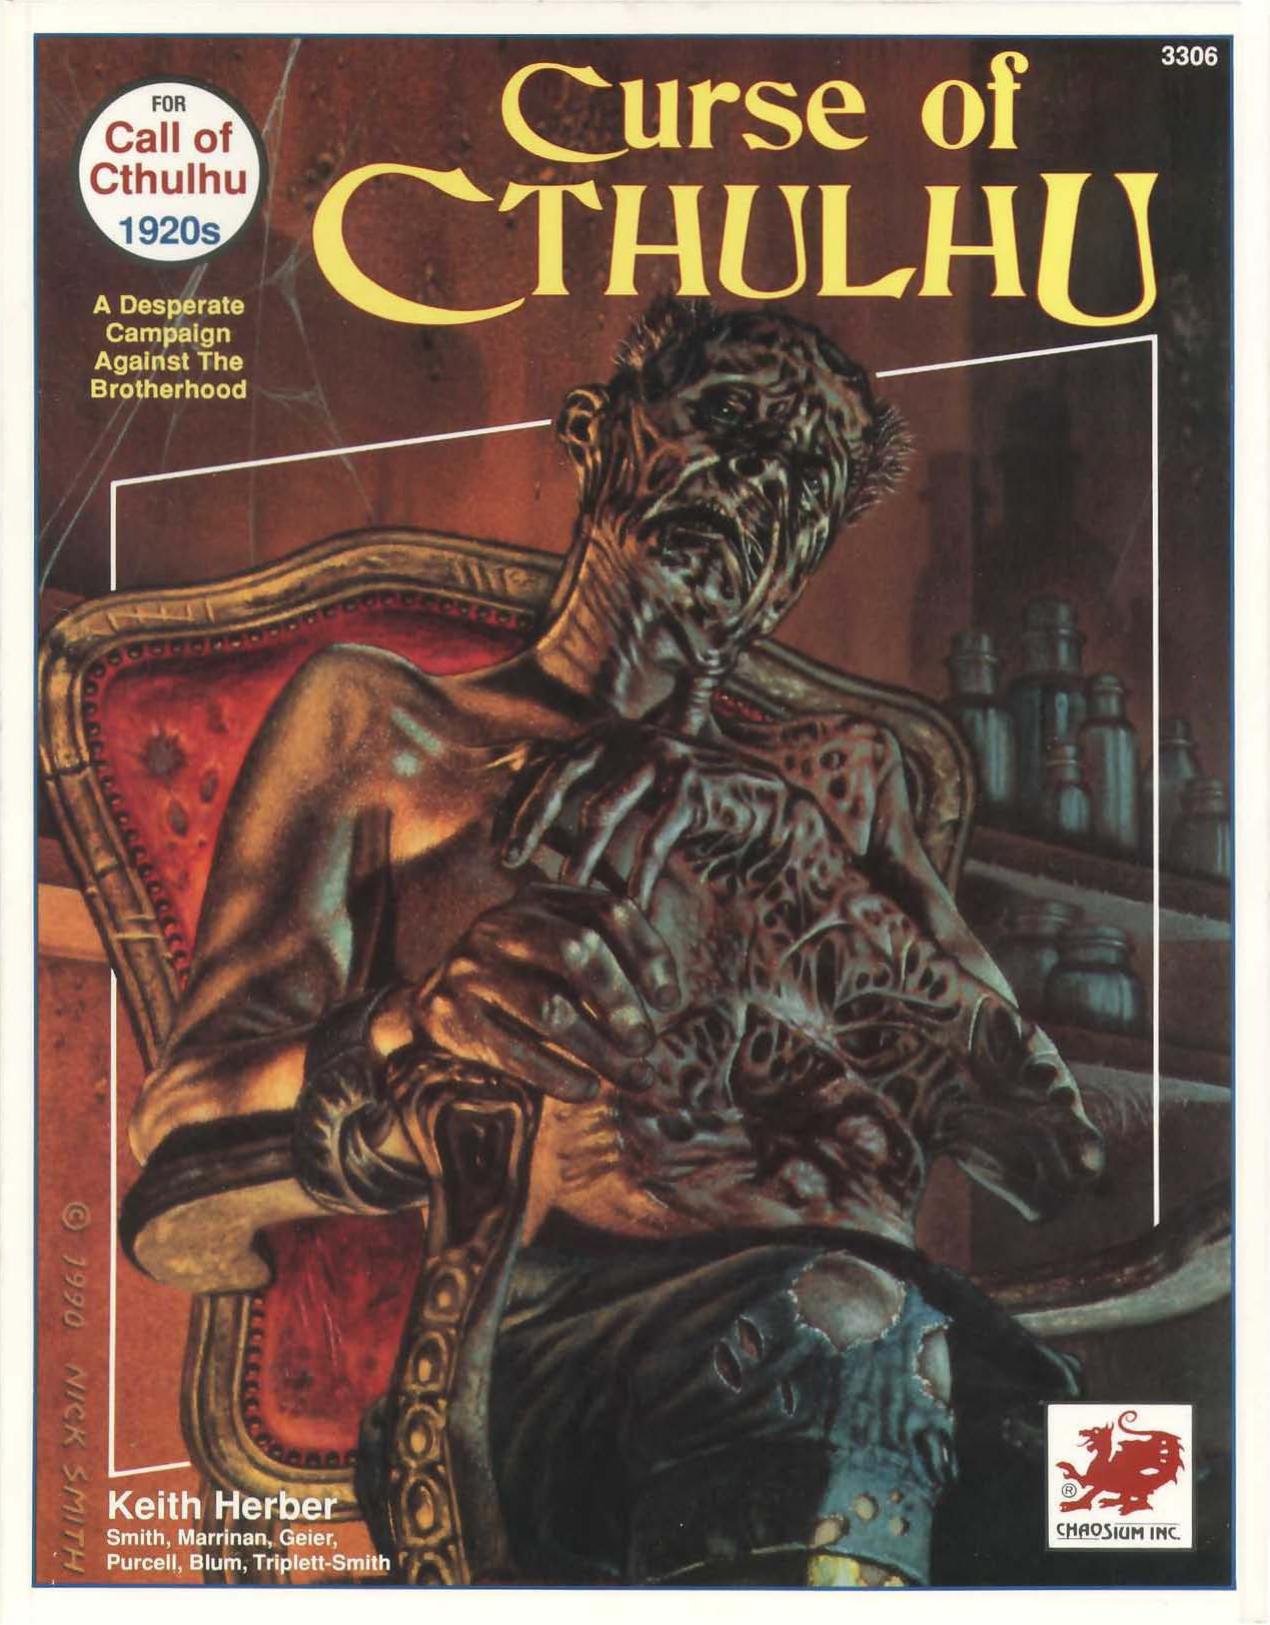 CoC 1920s Curse of Cthulhu